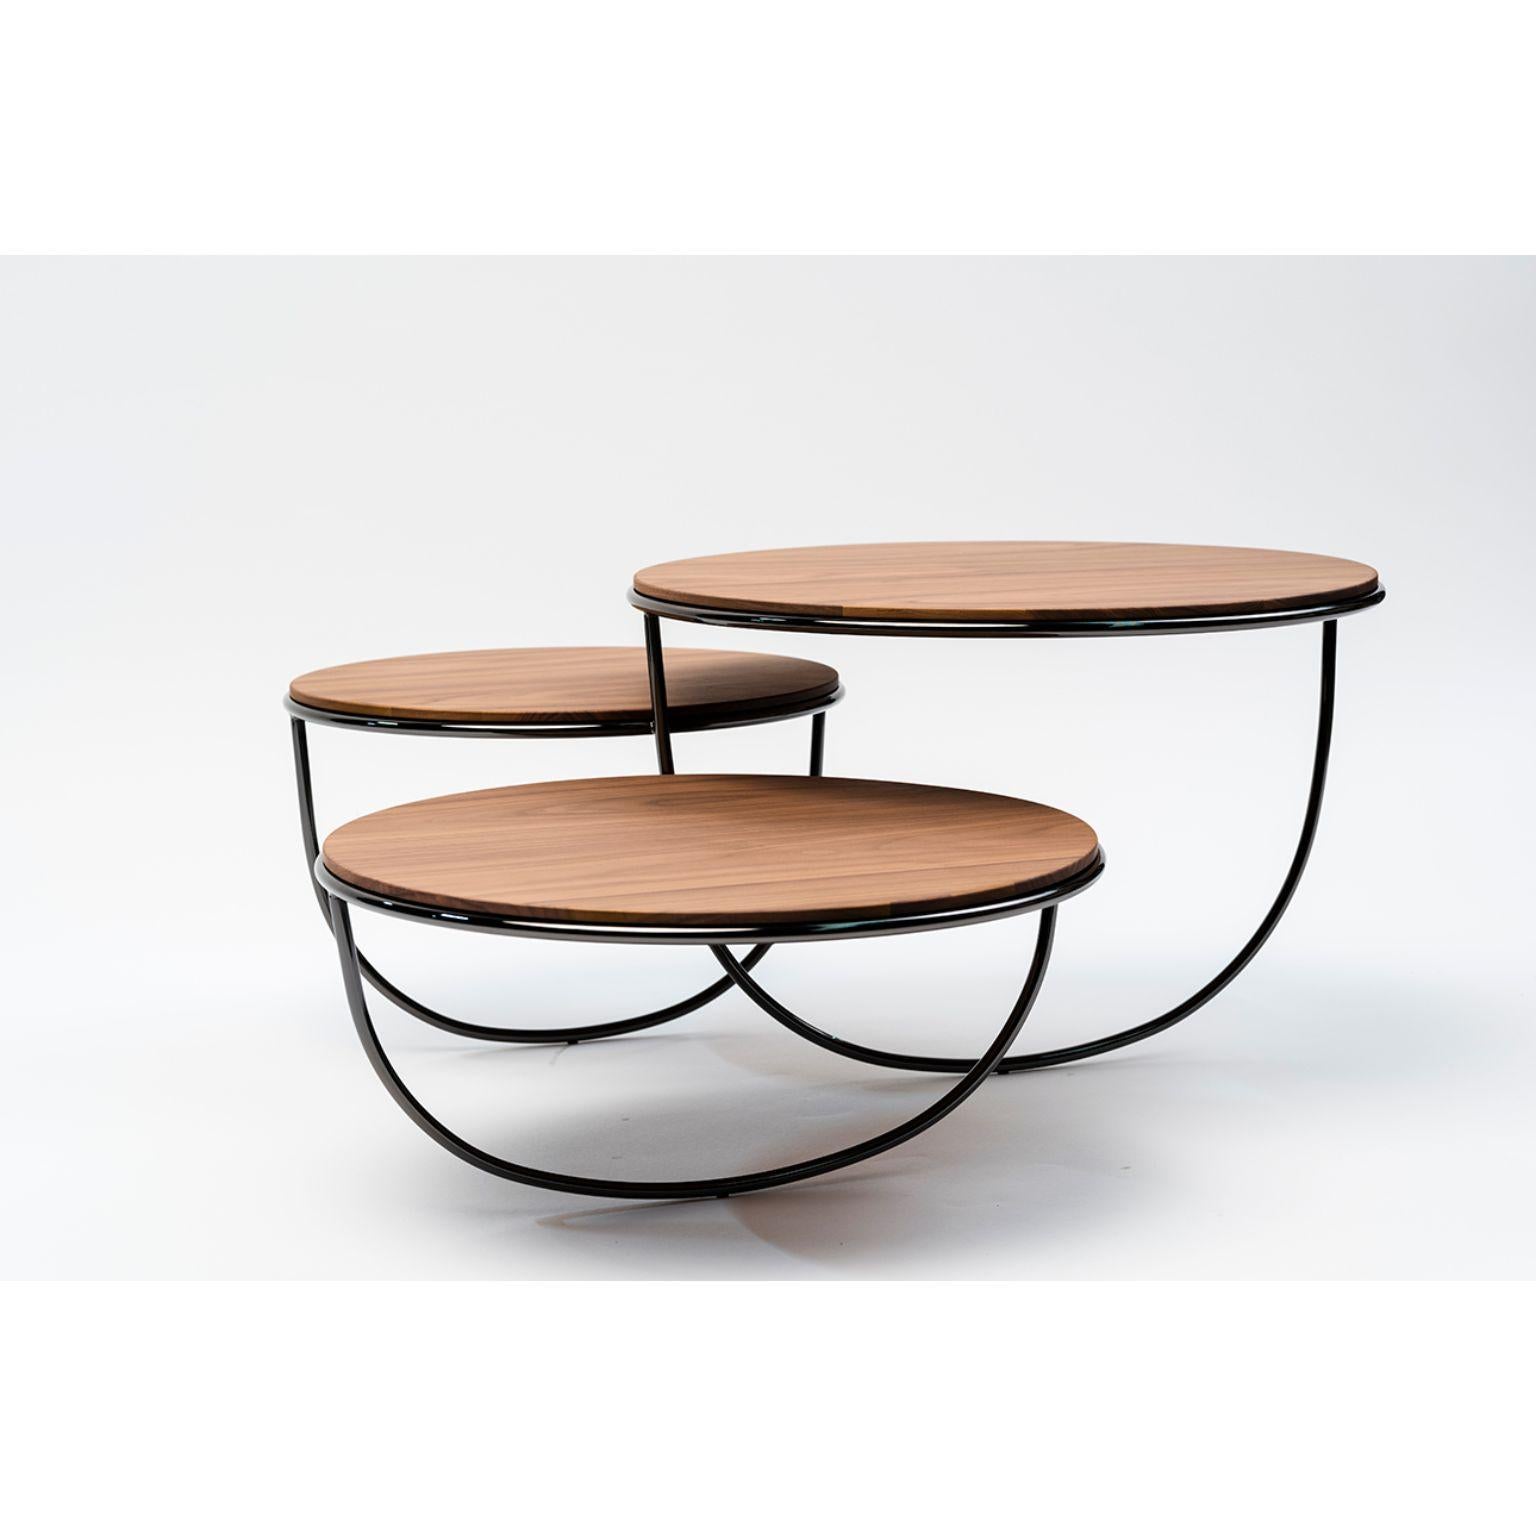 Trio side table by Nendo
Materials: Top: Noce canaletto solid wood, glass or metal
 Structure: Black chrome metal, Black/Light grey NCS 2002 Y50R/Coral NCS 2570 Y70R /Dark 
 Green NCS 8010 B70G powder-coated metal
Dimensions: W84.7 x D76.3 x